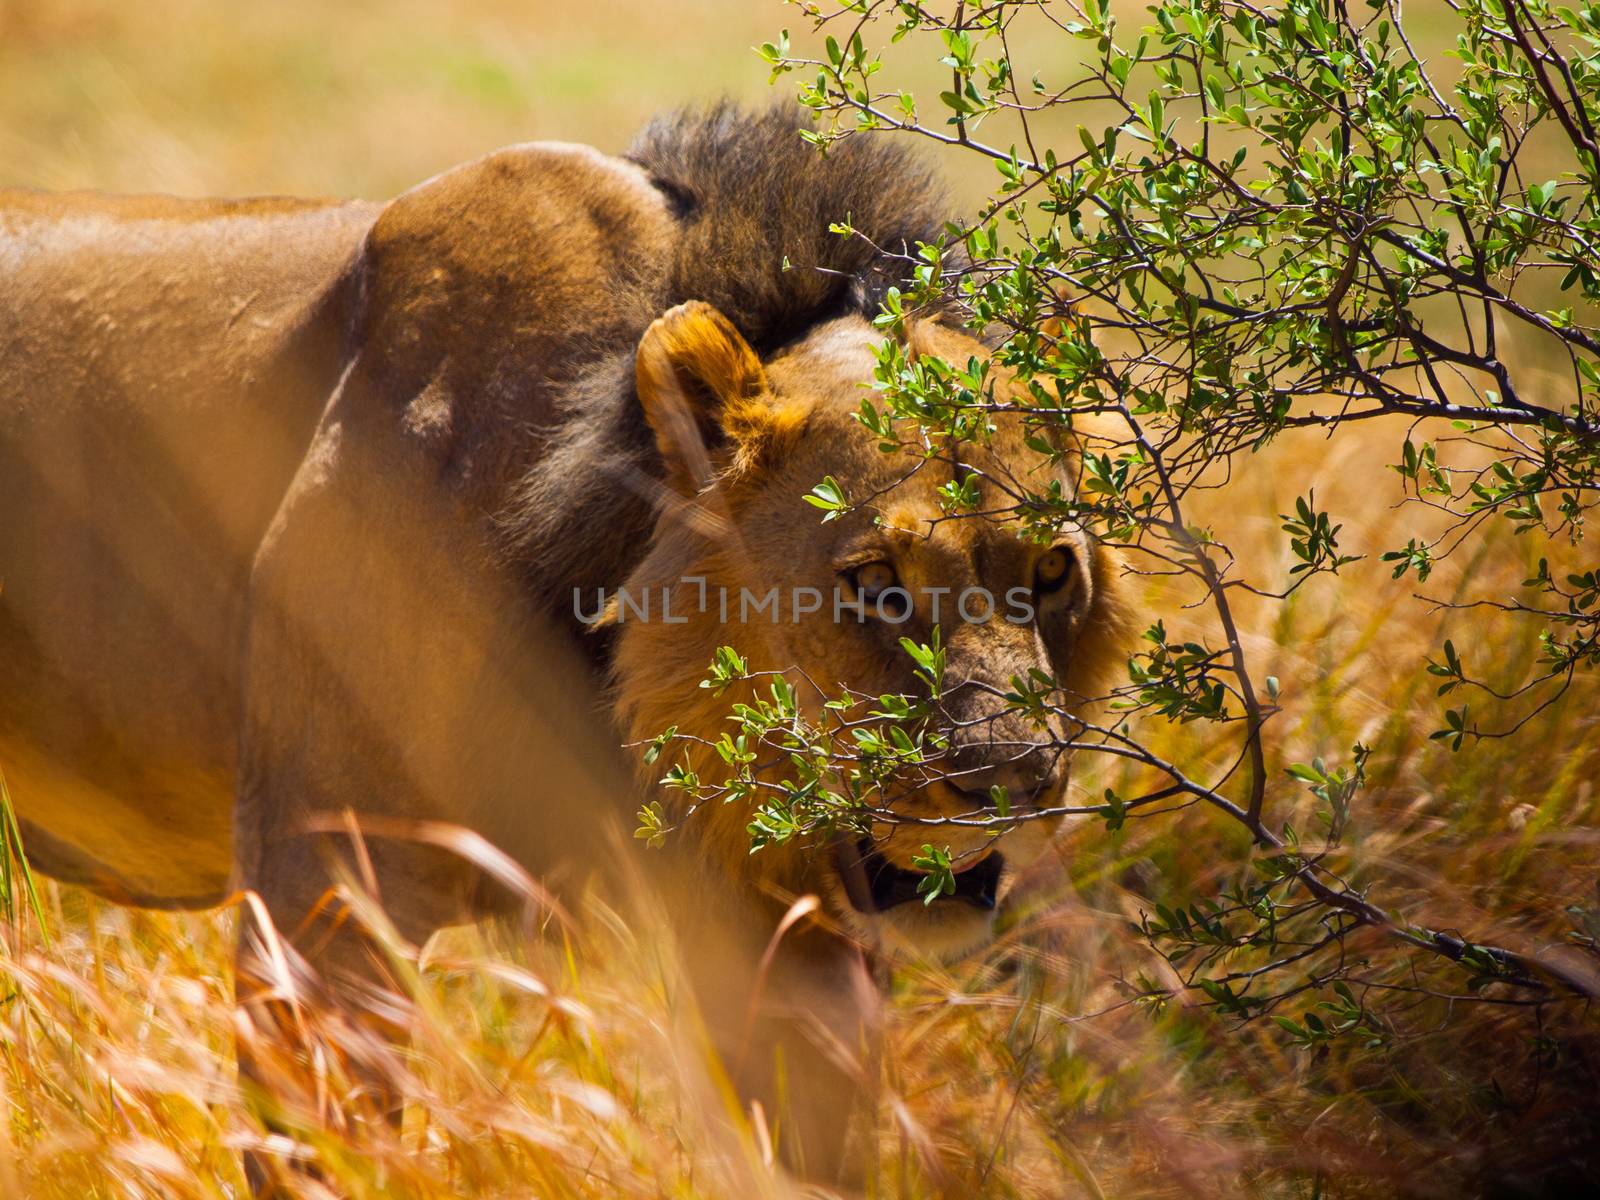 Tracking lion hidden in the grass